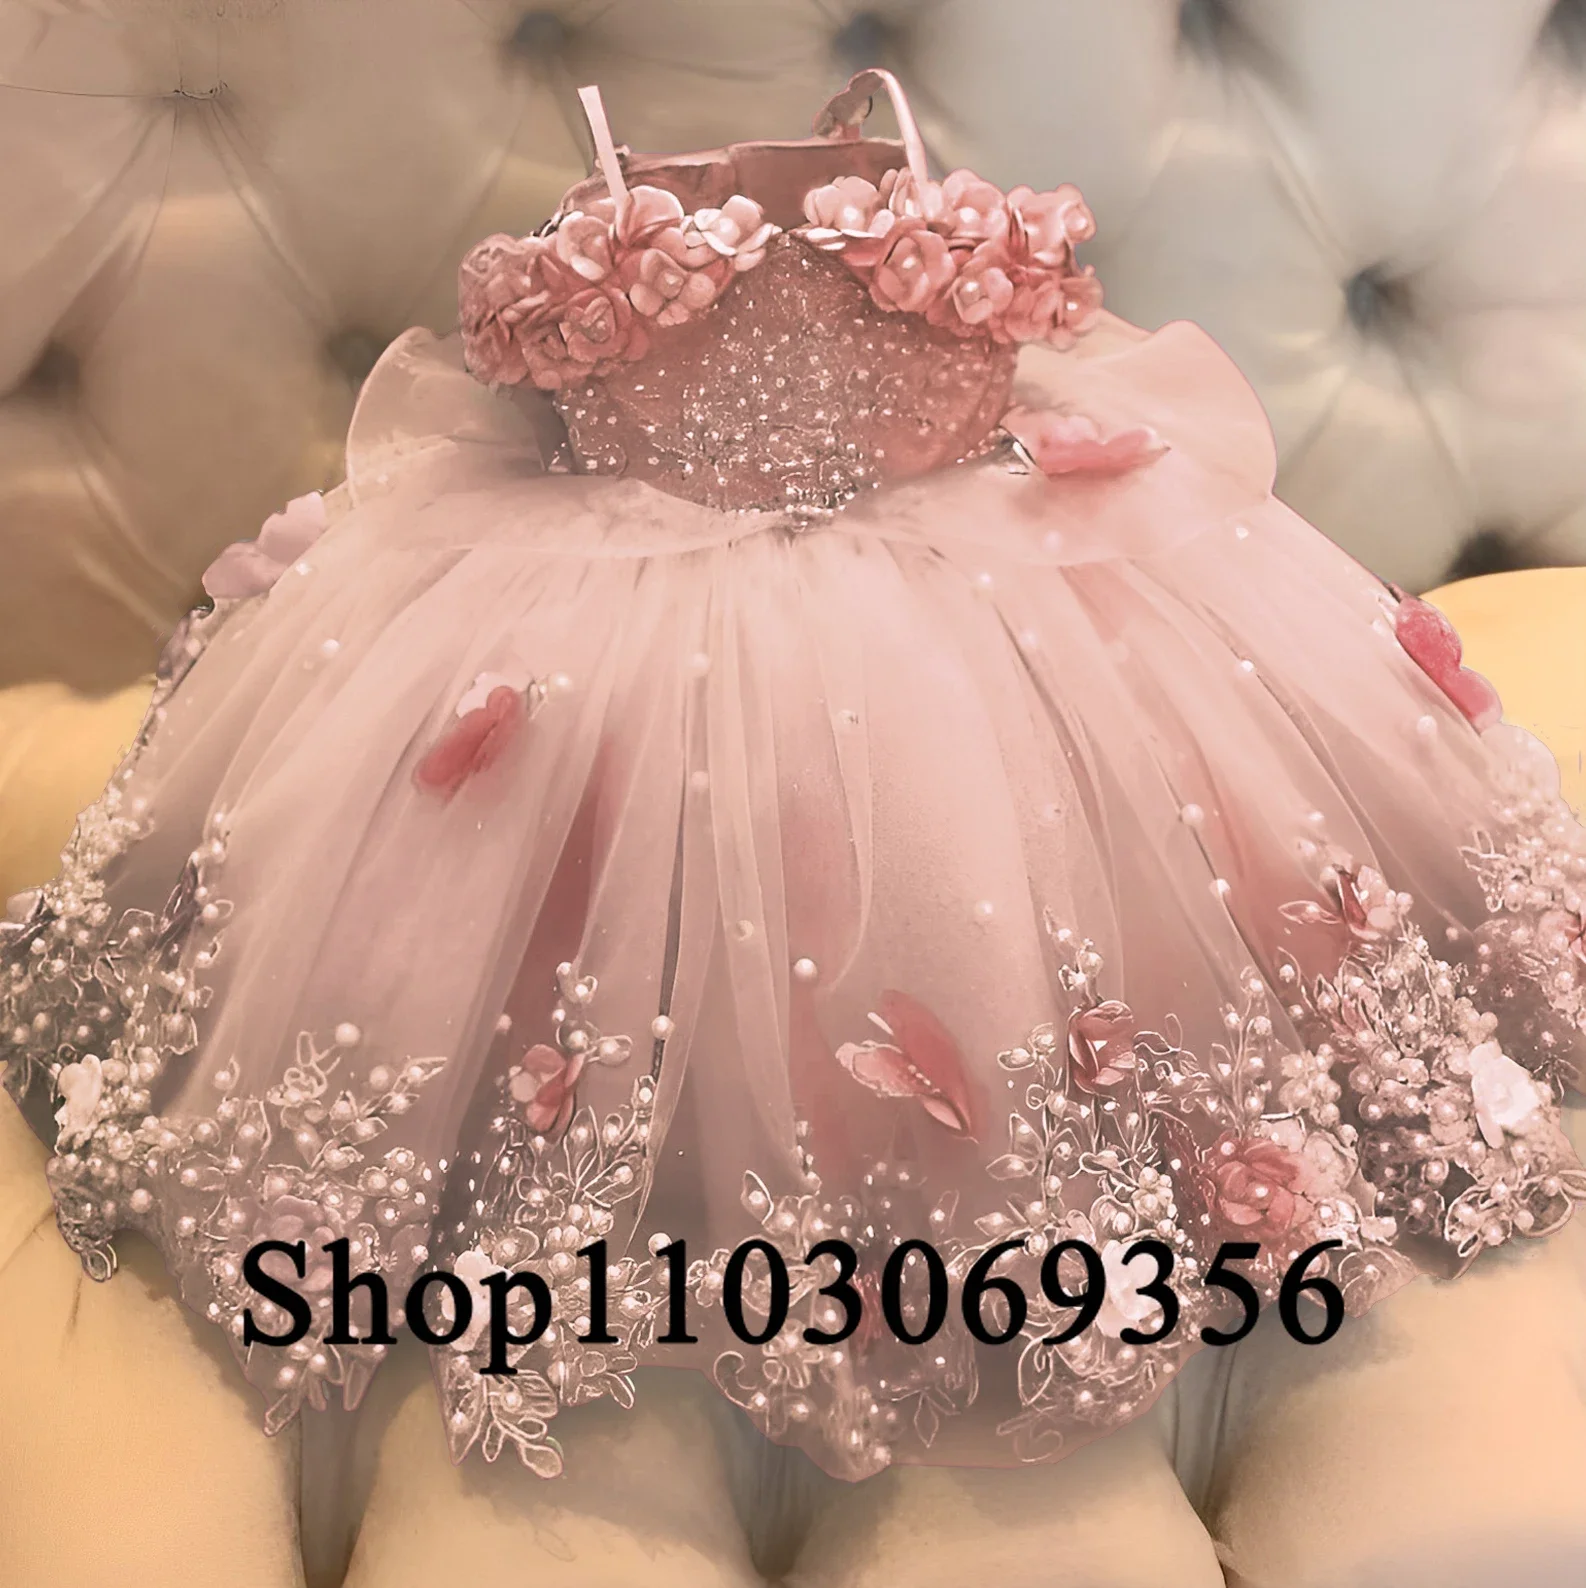 

Flower Girl Dress Lace Off Shoulder Pearls Butterflies Organza Baby Girl Wedding Birthday Party First Communion Dress Events